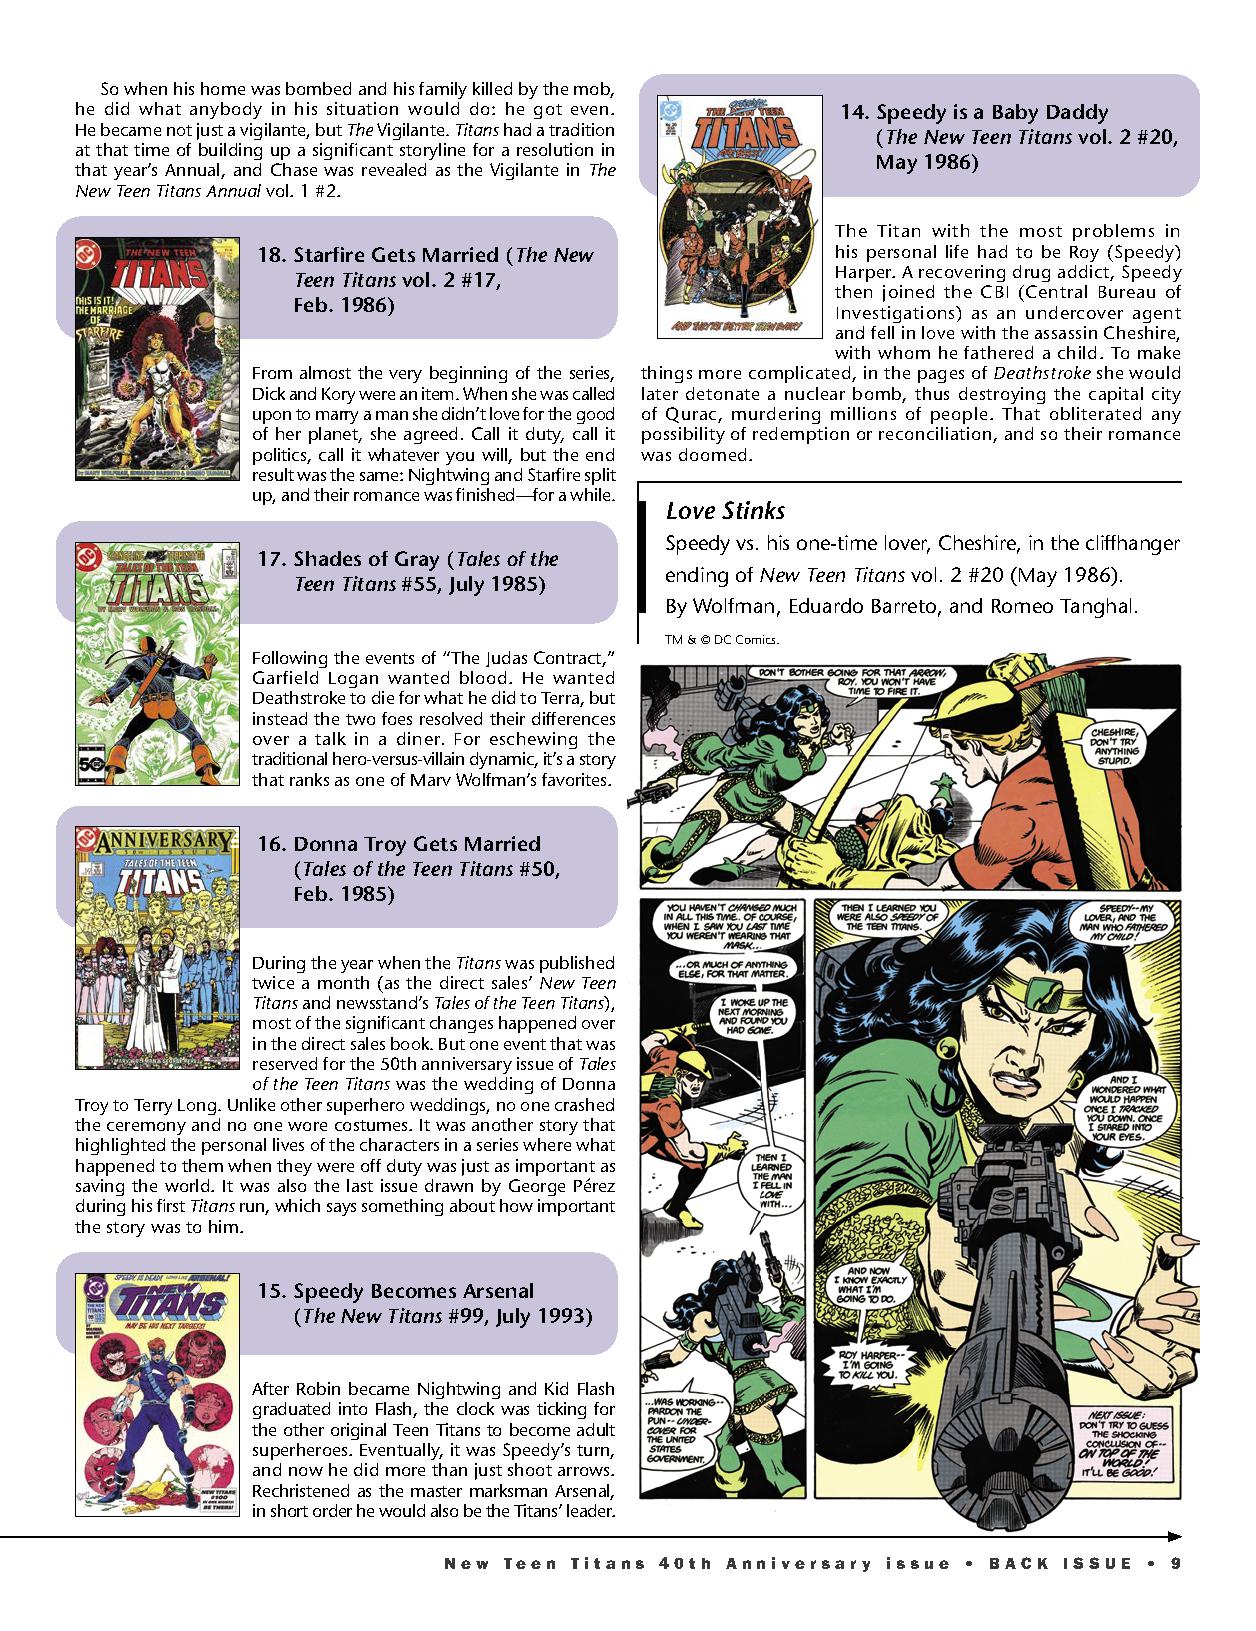 Read online Back Issue comic -  Issue #122 - 11